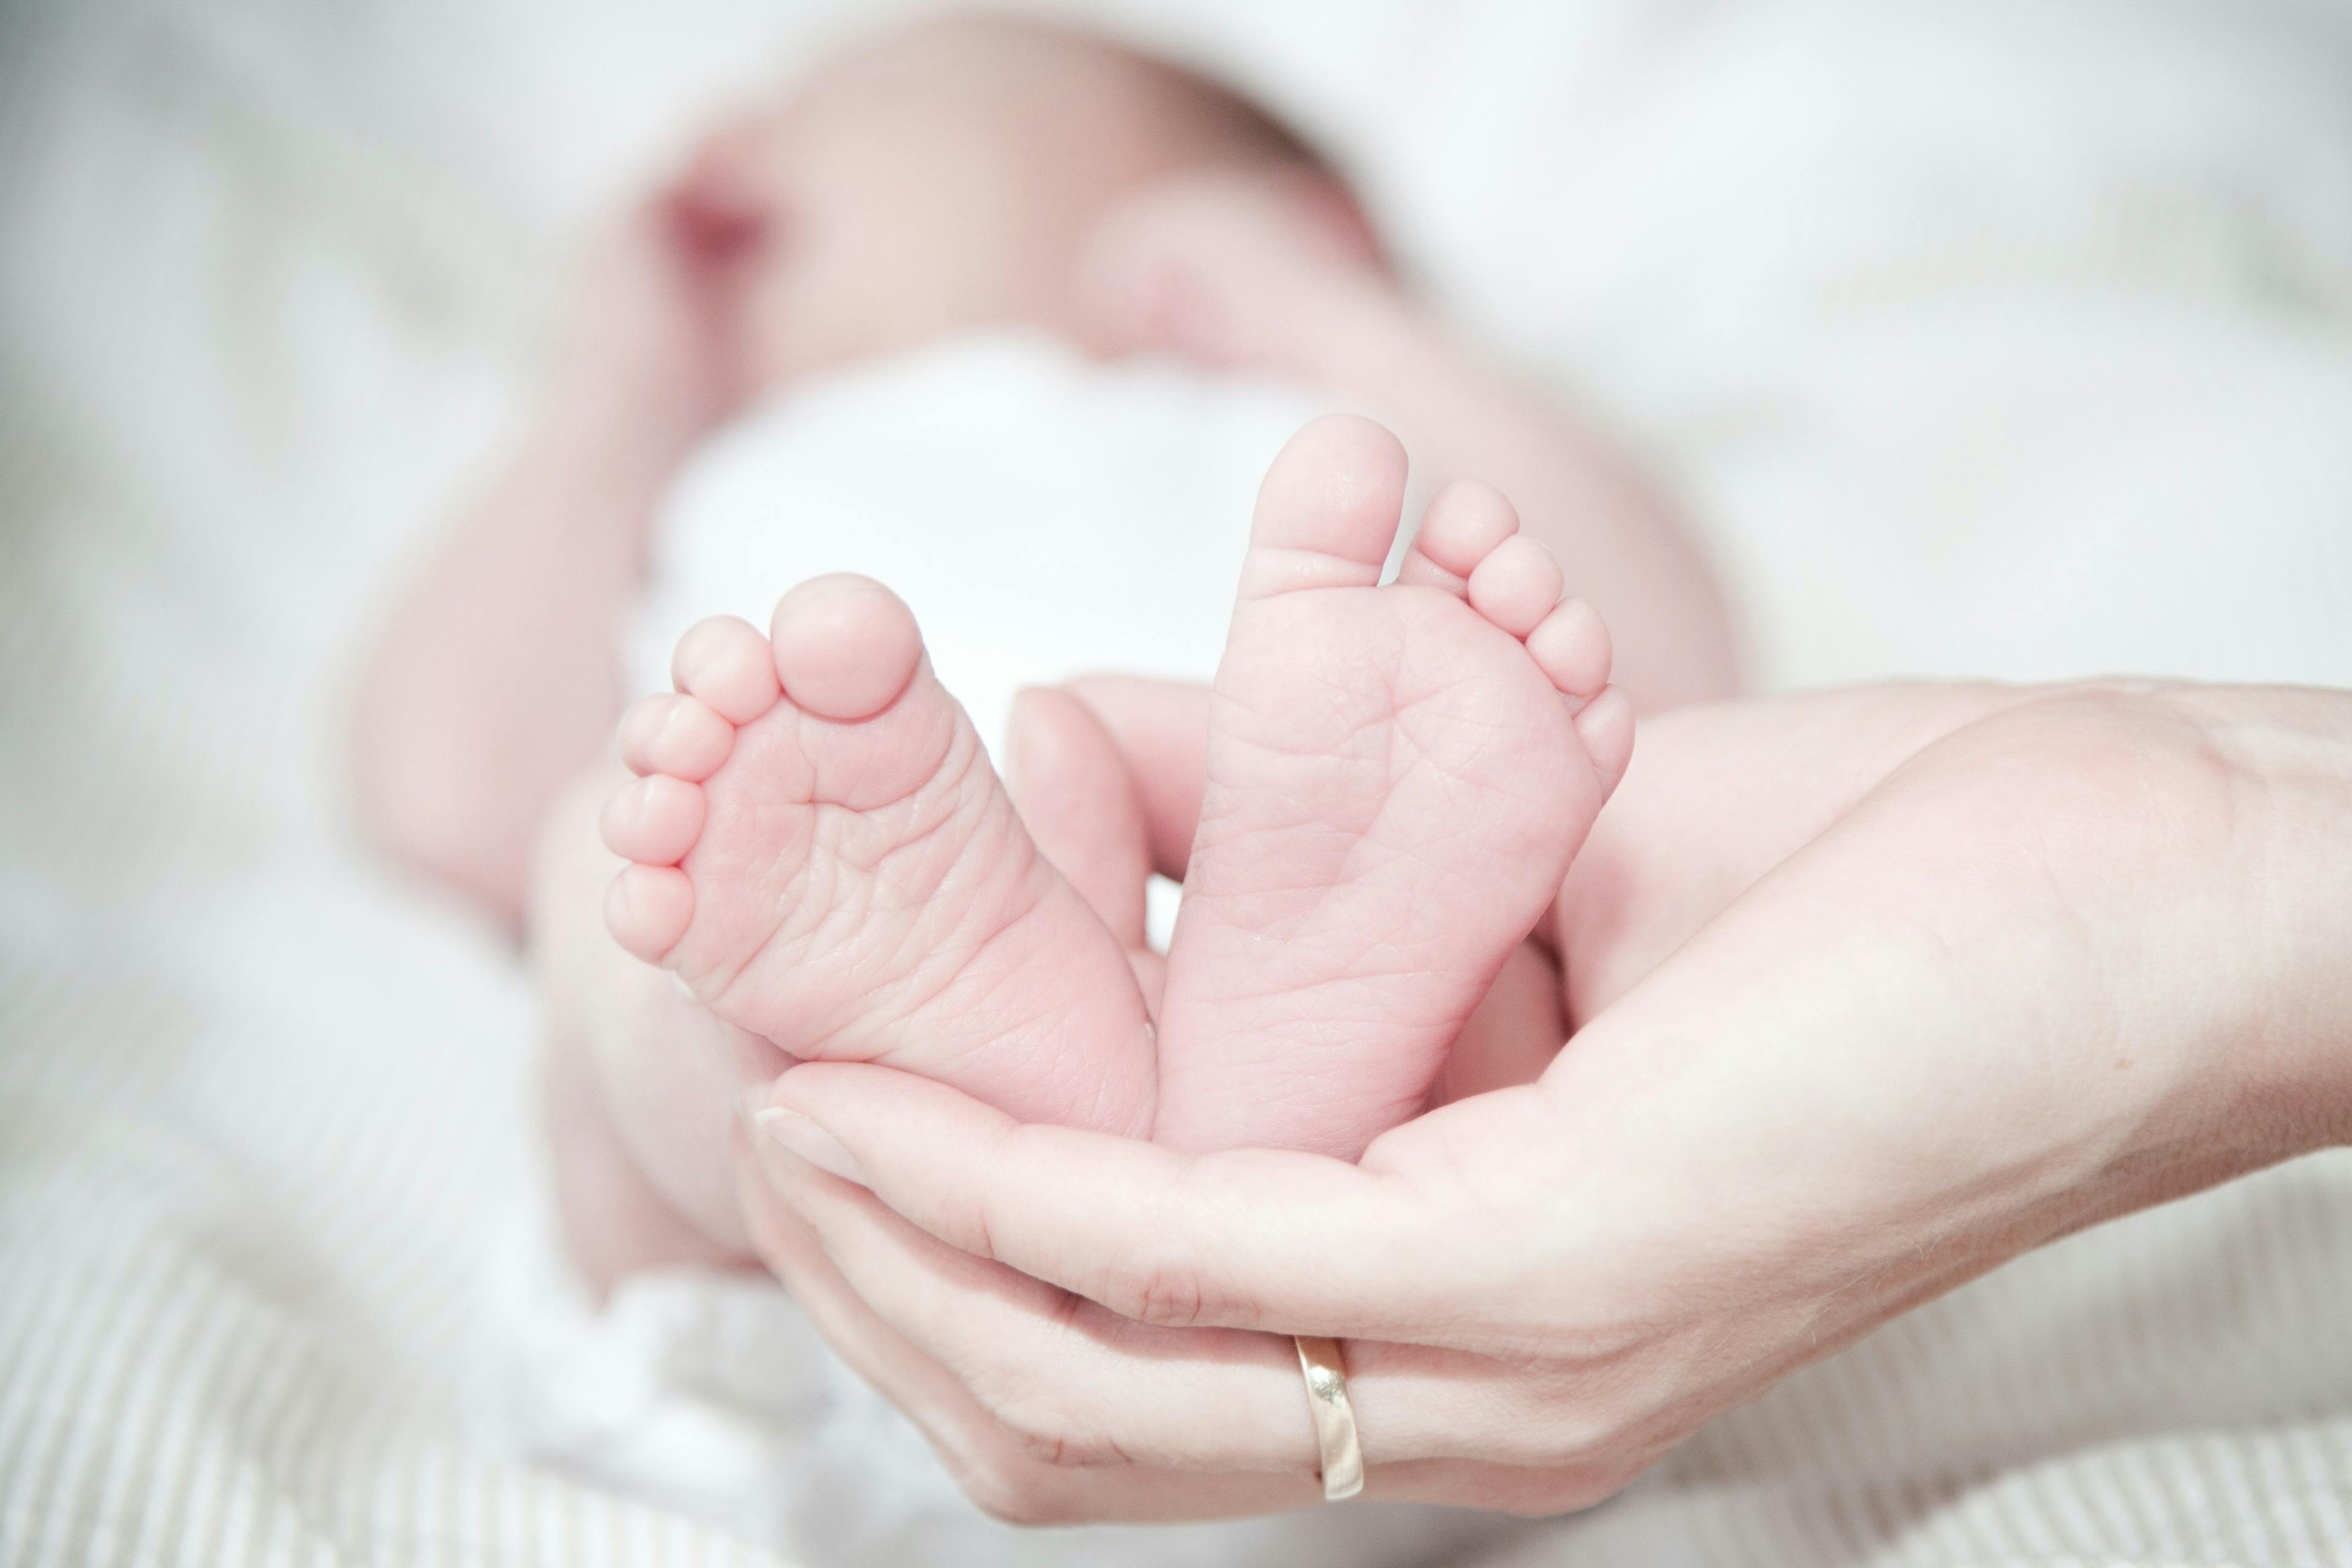 Luxembourg sees growing demand for homebirths